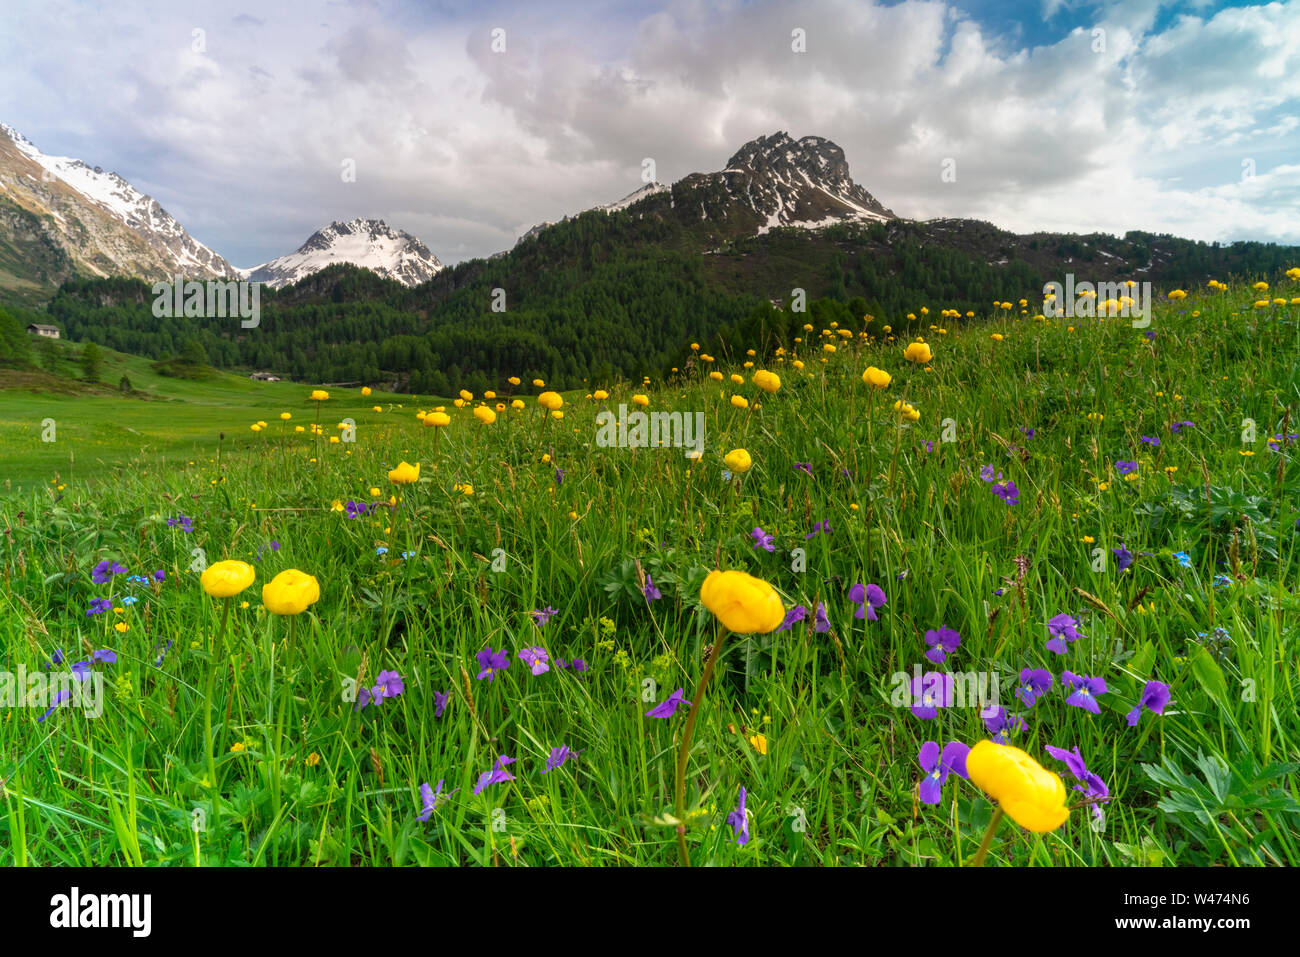 Buttercup and wild flowers in green meadows during spring, Maloja Pass, Engadin, canton of Graubunden, Switzerland Stock Photo